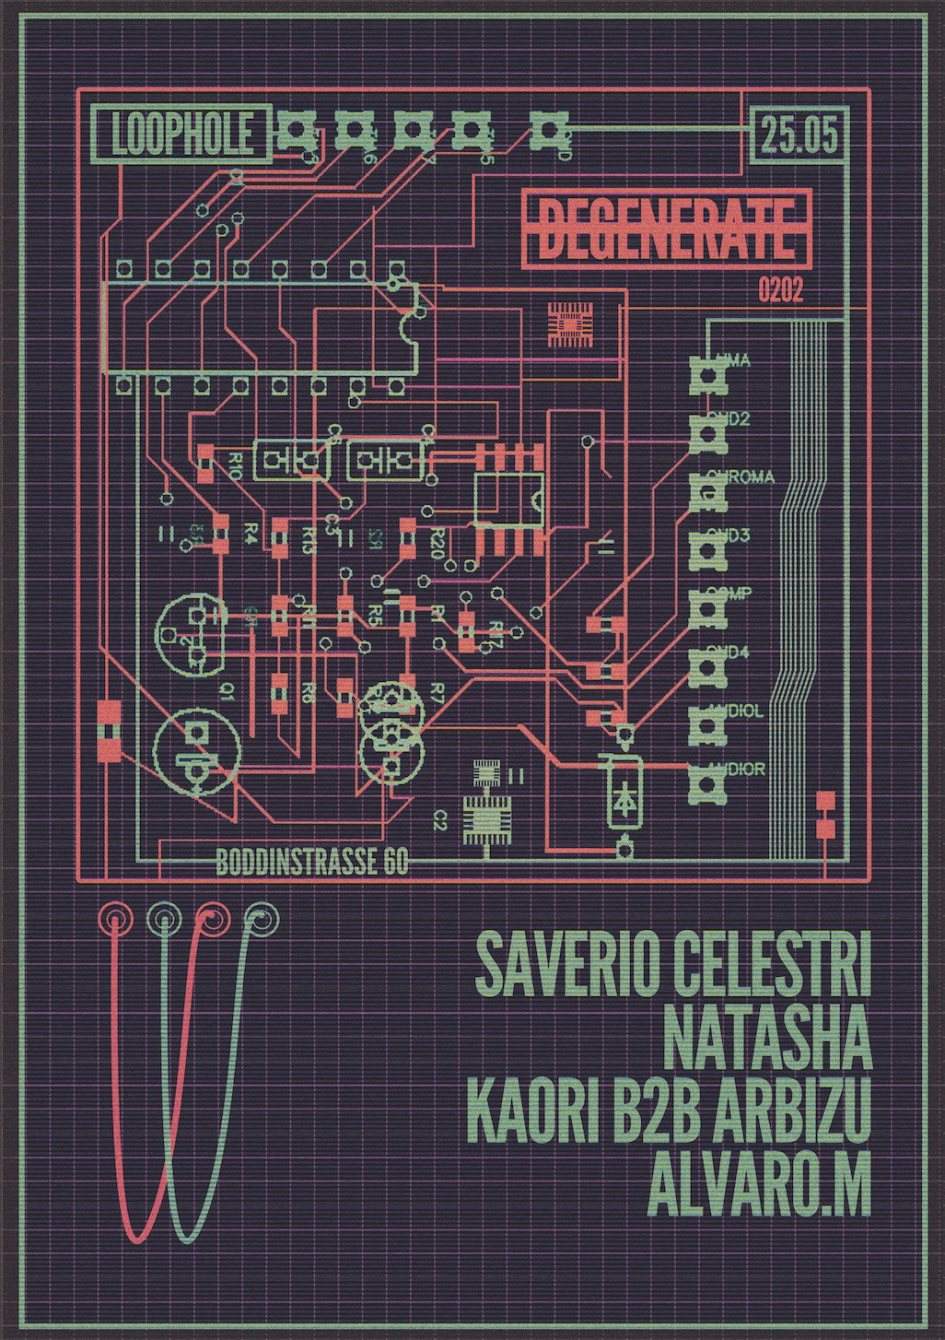 -Degenerate-0202 with Saverio Celestri & Late Consequence - フライヤー表